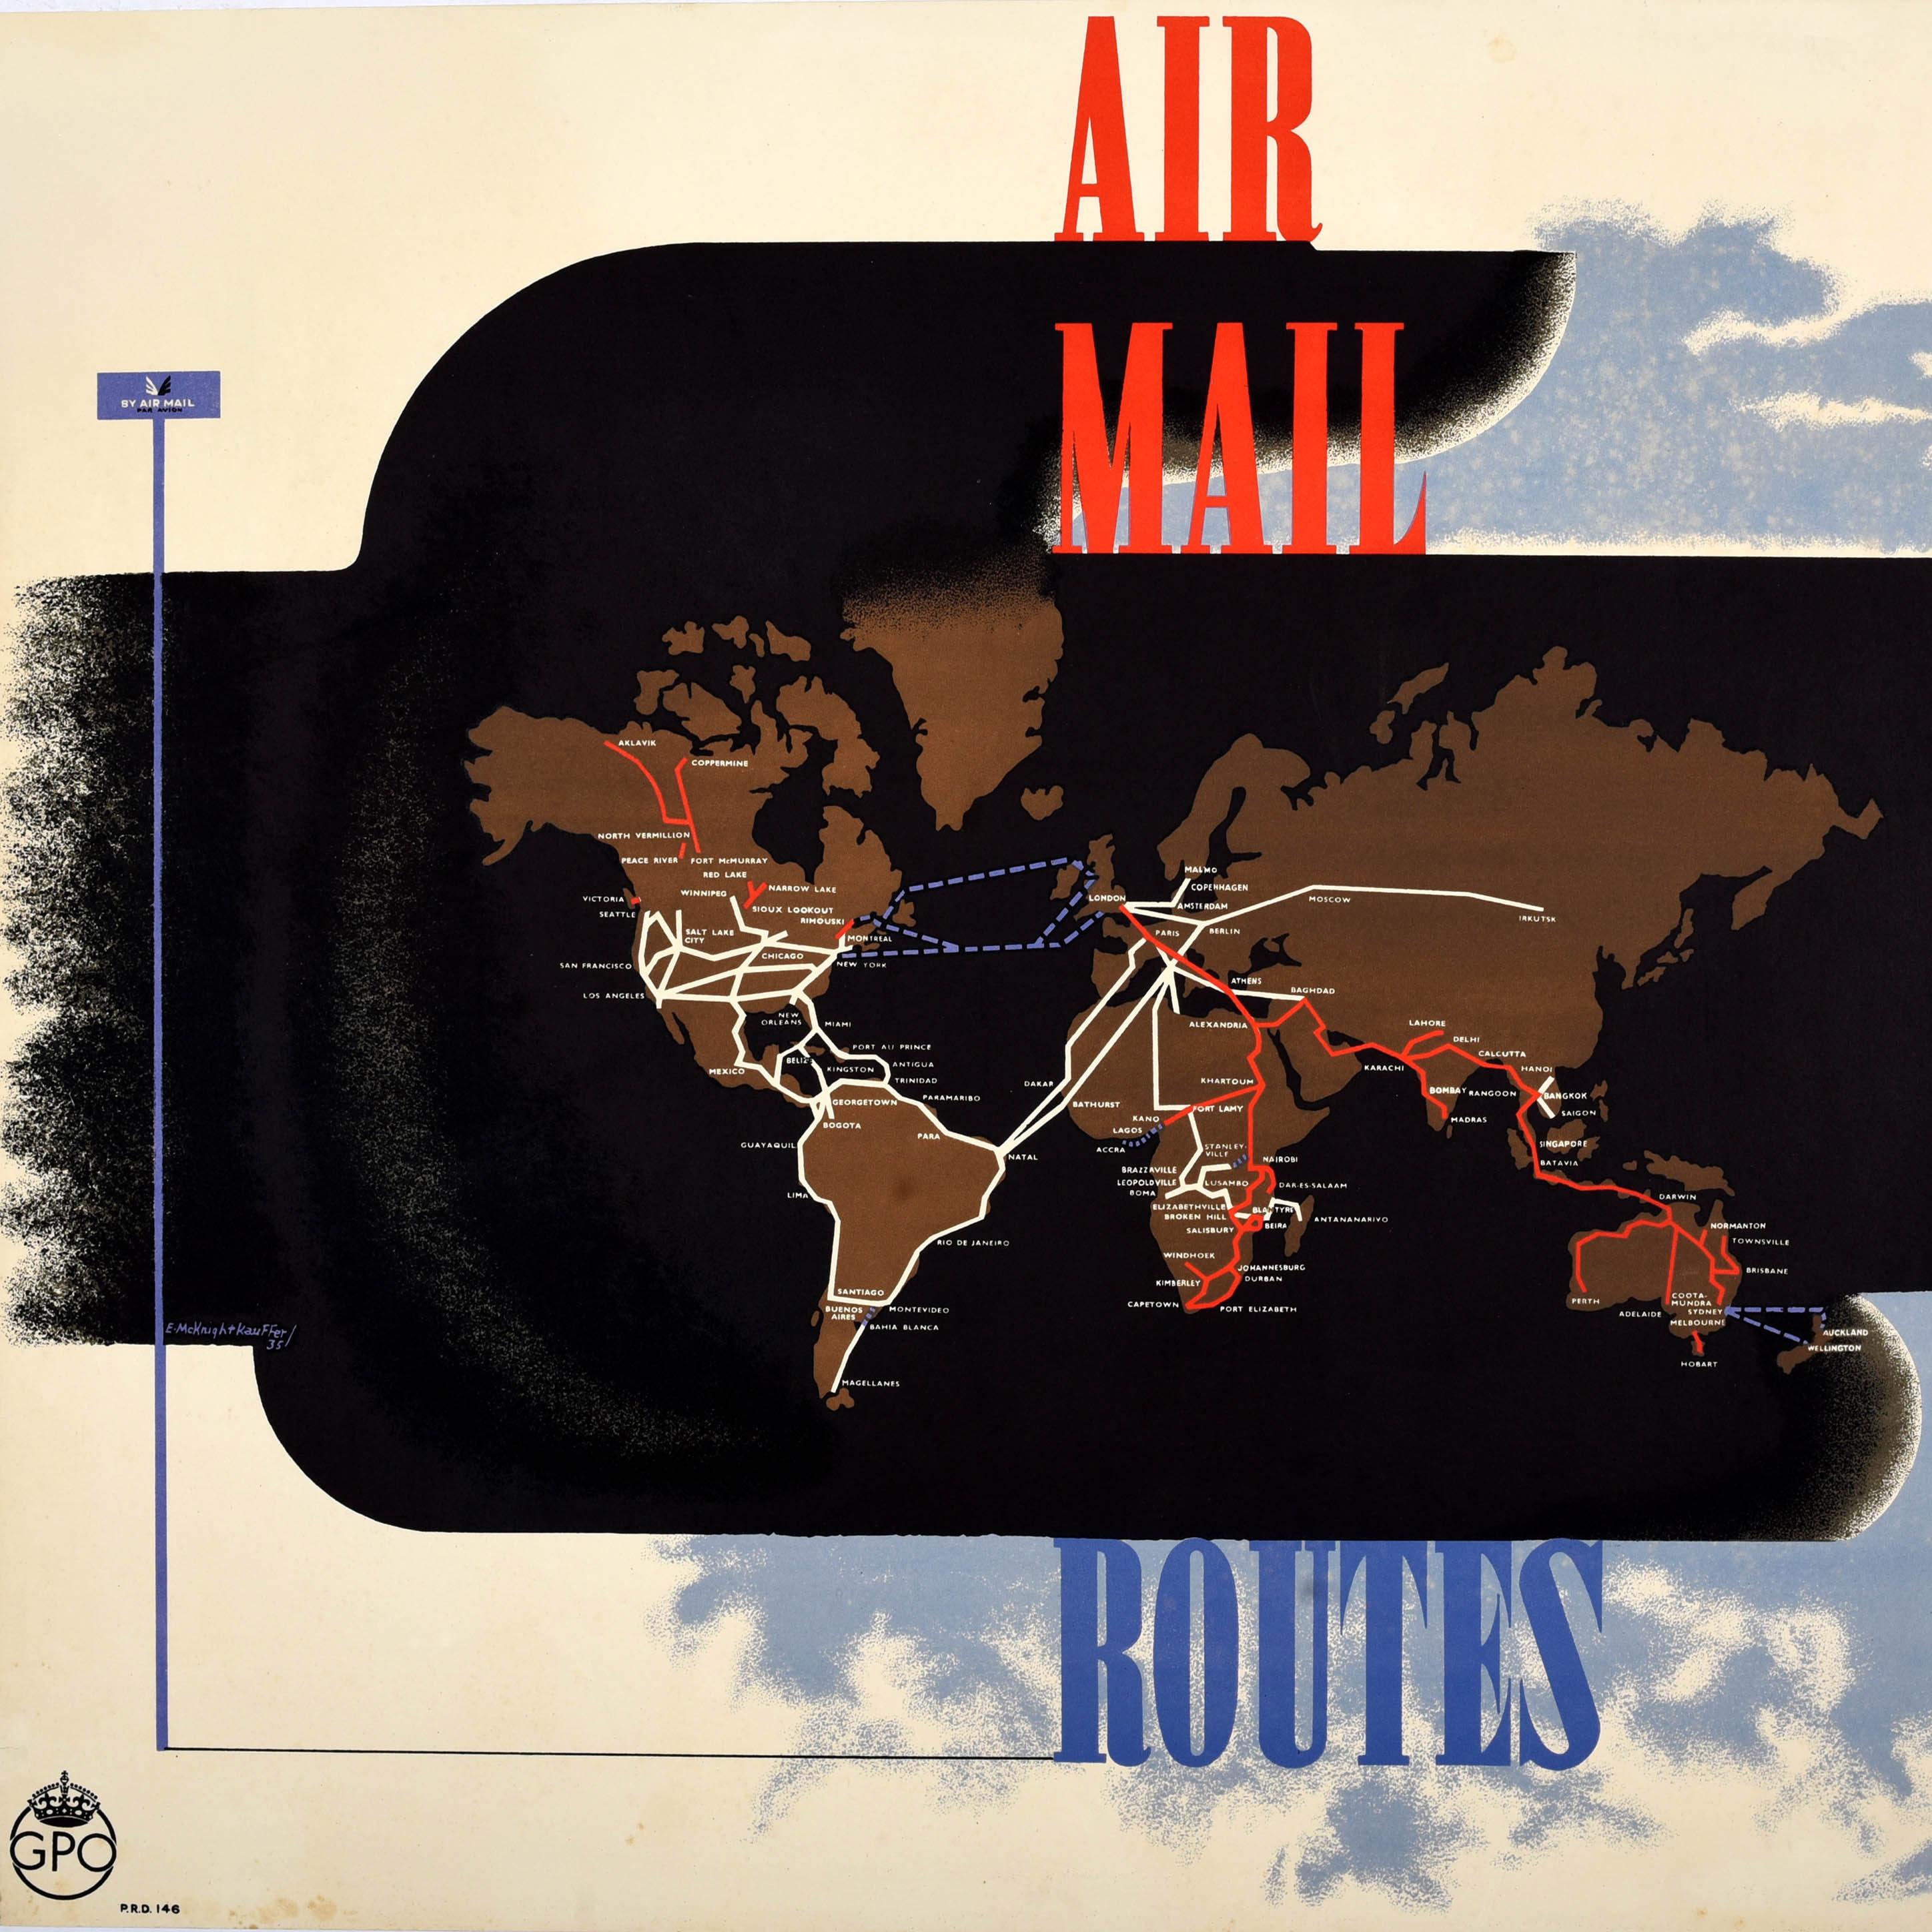 British Rare Original Vintage Advertising Poster Air Mail Routes GPO Mcknight Kauffer For Sale